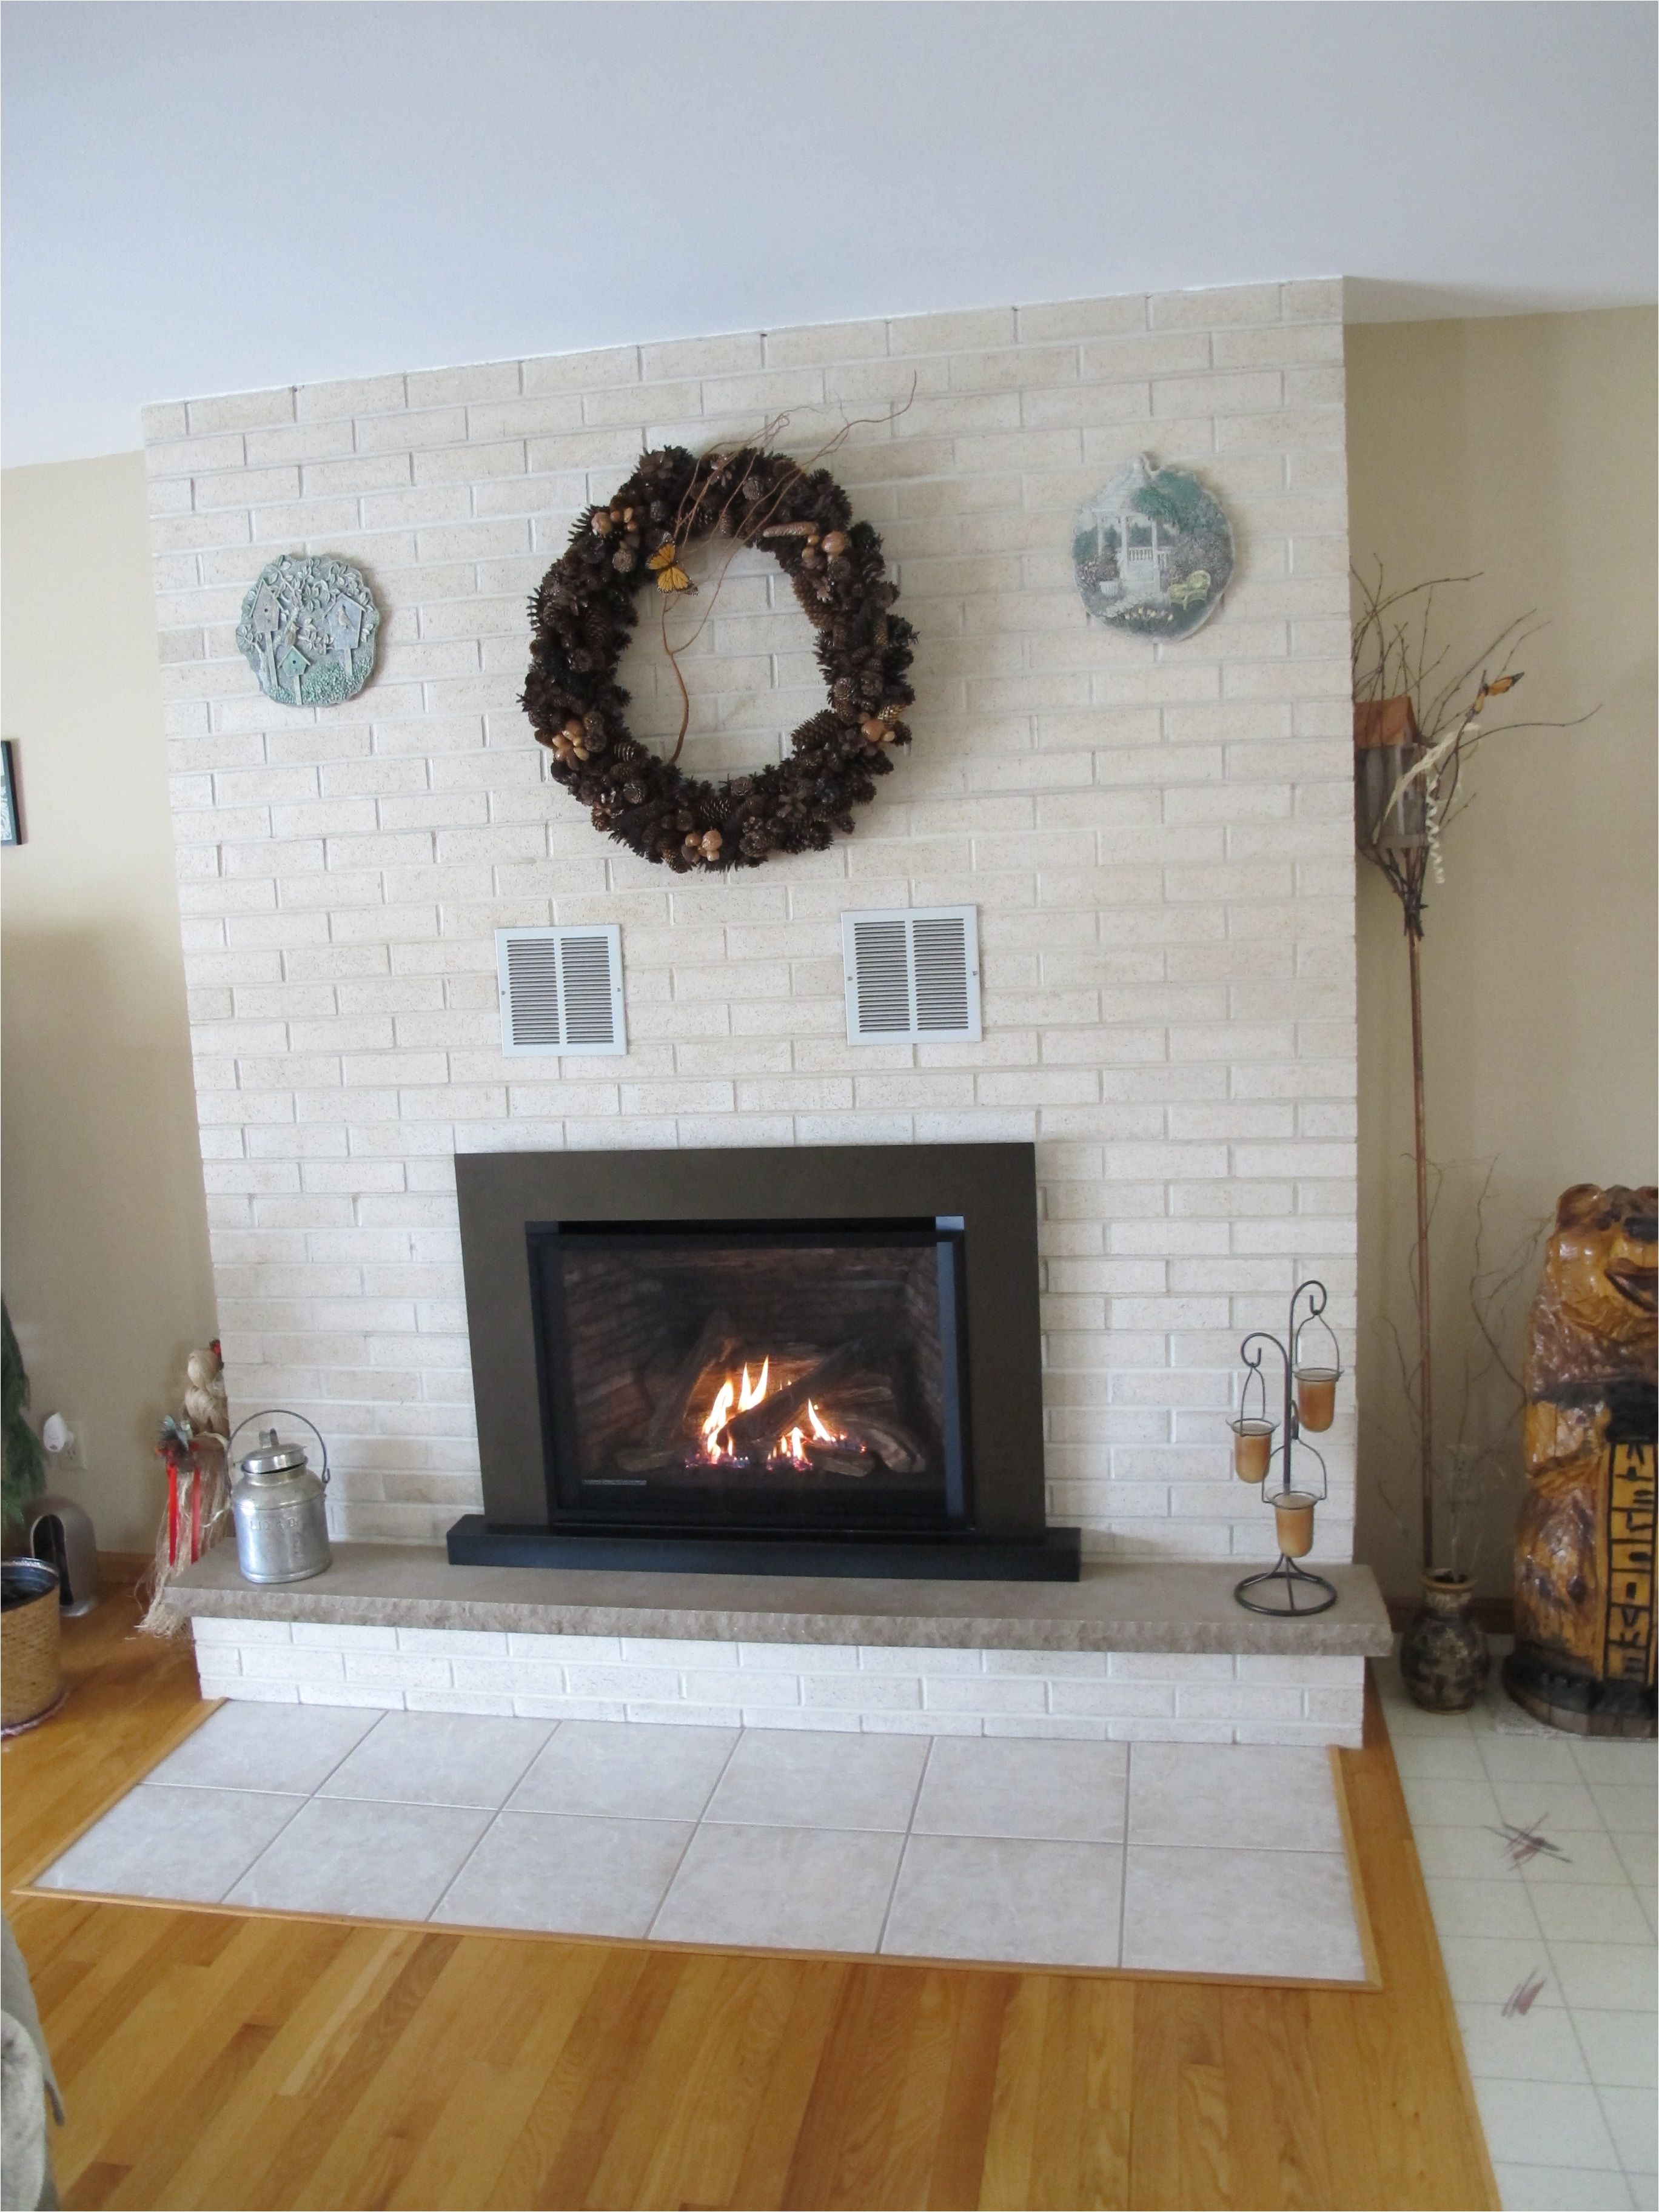 Installing A Gas Insert Into A Fireplace Valor G4 785 Gas Insert In Brick Fireplace Valor Radiant Gas